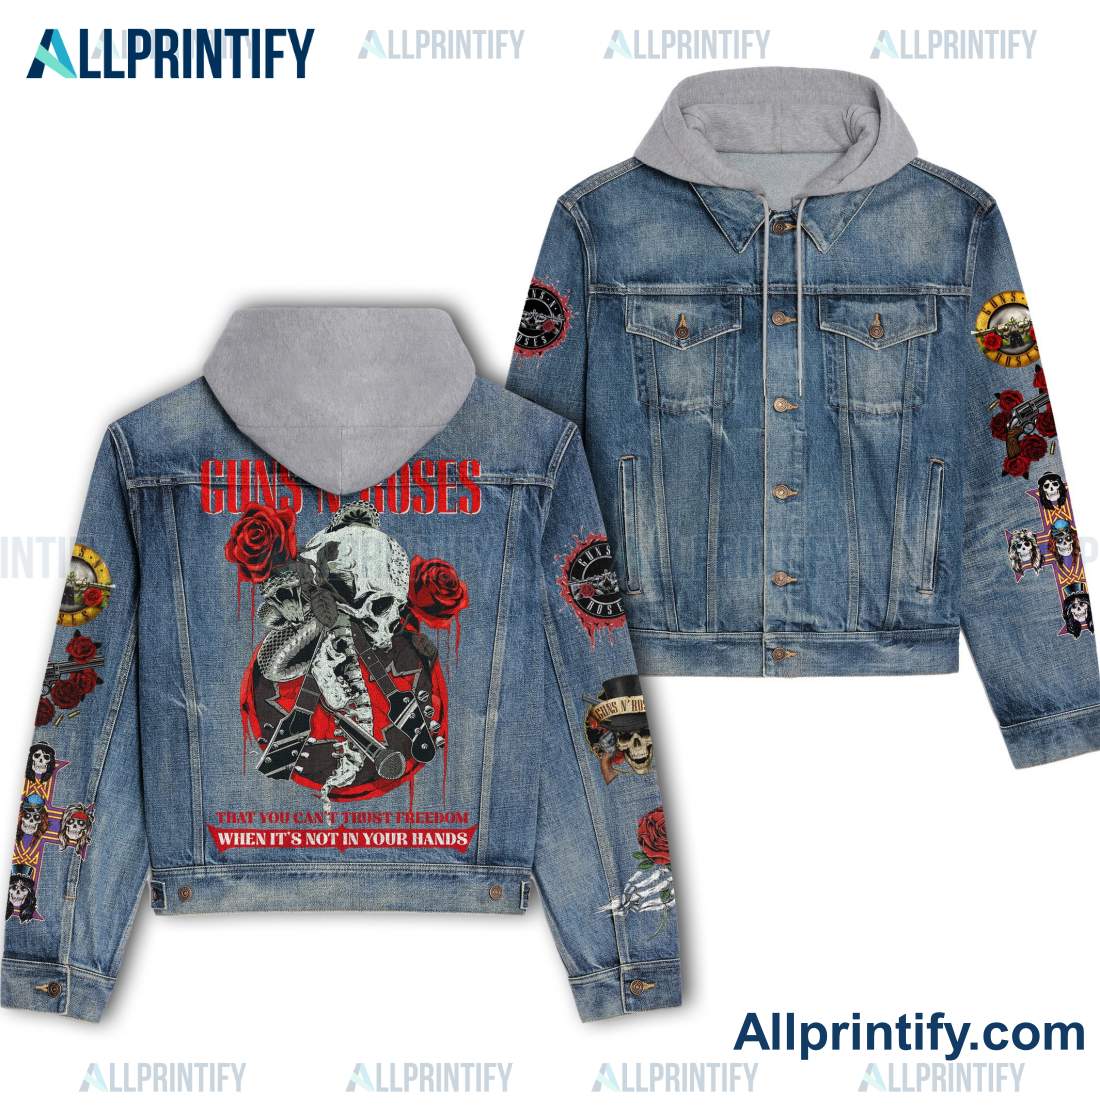 Guns N' Rose That You Can't Trust Freedom When It's Not In Your Hands Hooded Denim Jacket